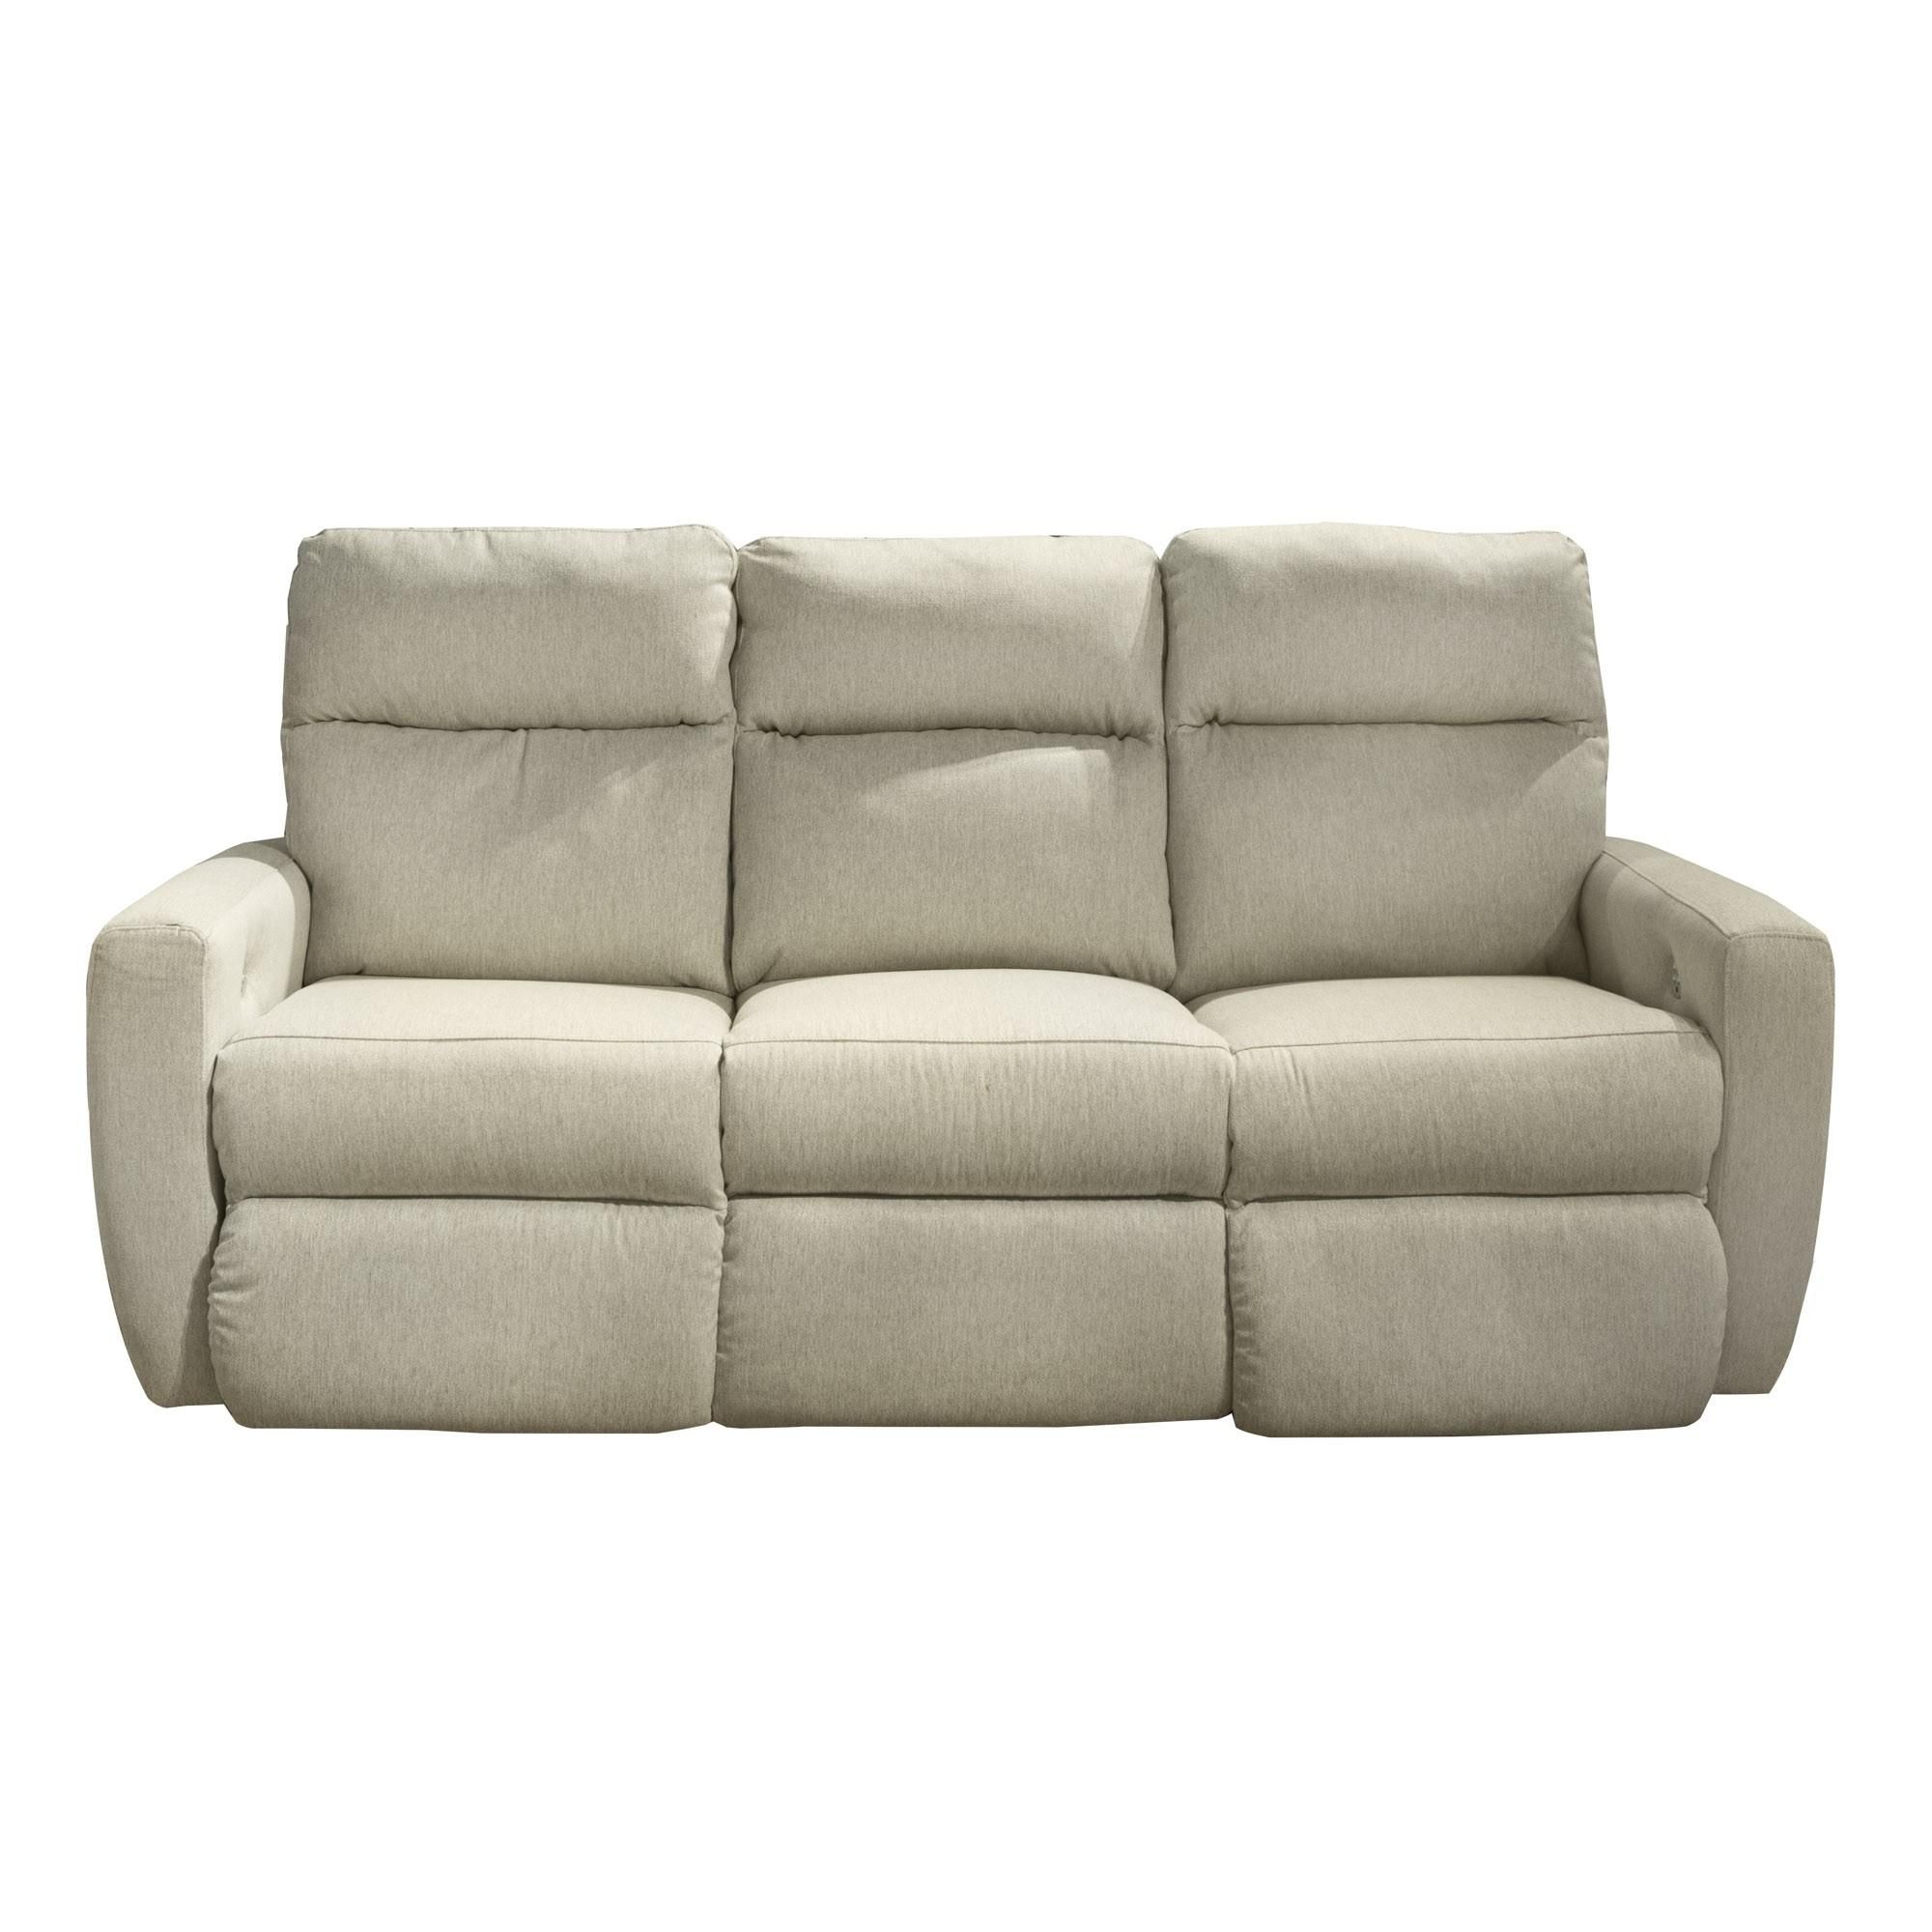 Knockout Power Reclining Sofa With Power Headrest – Bernie Pertaining To Rv Recliner Sofas (View 19 of 20)